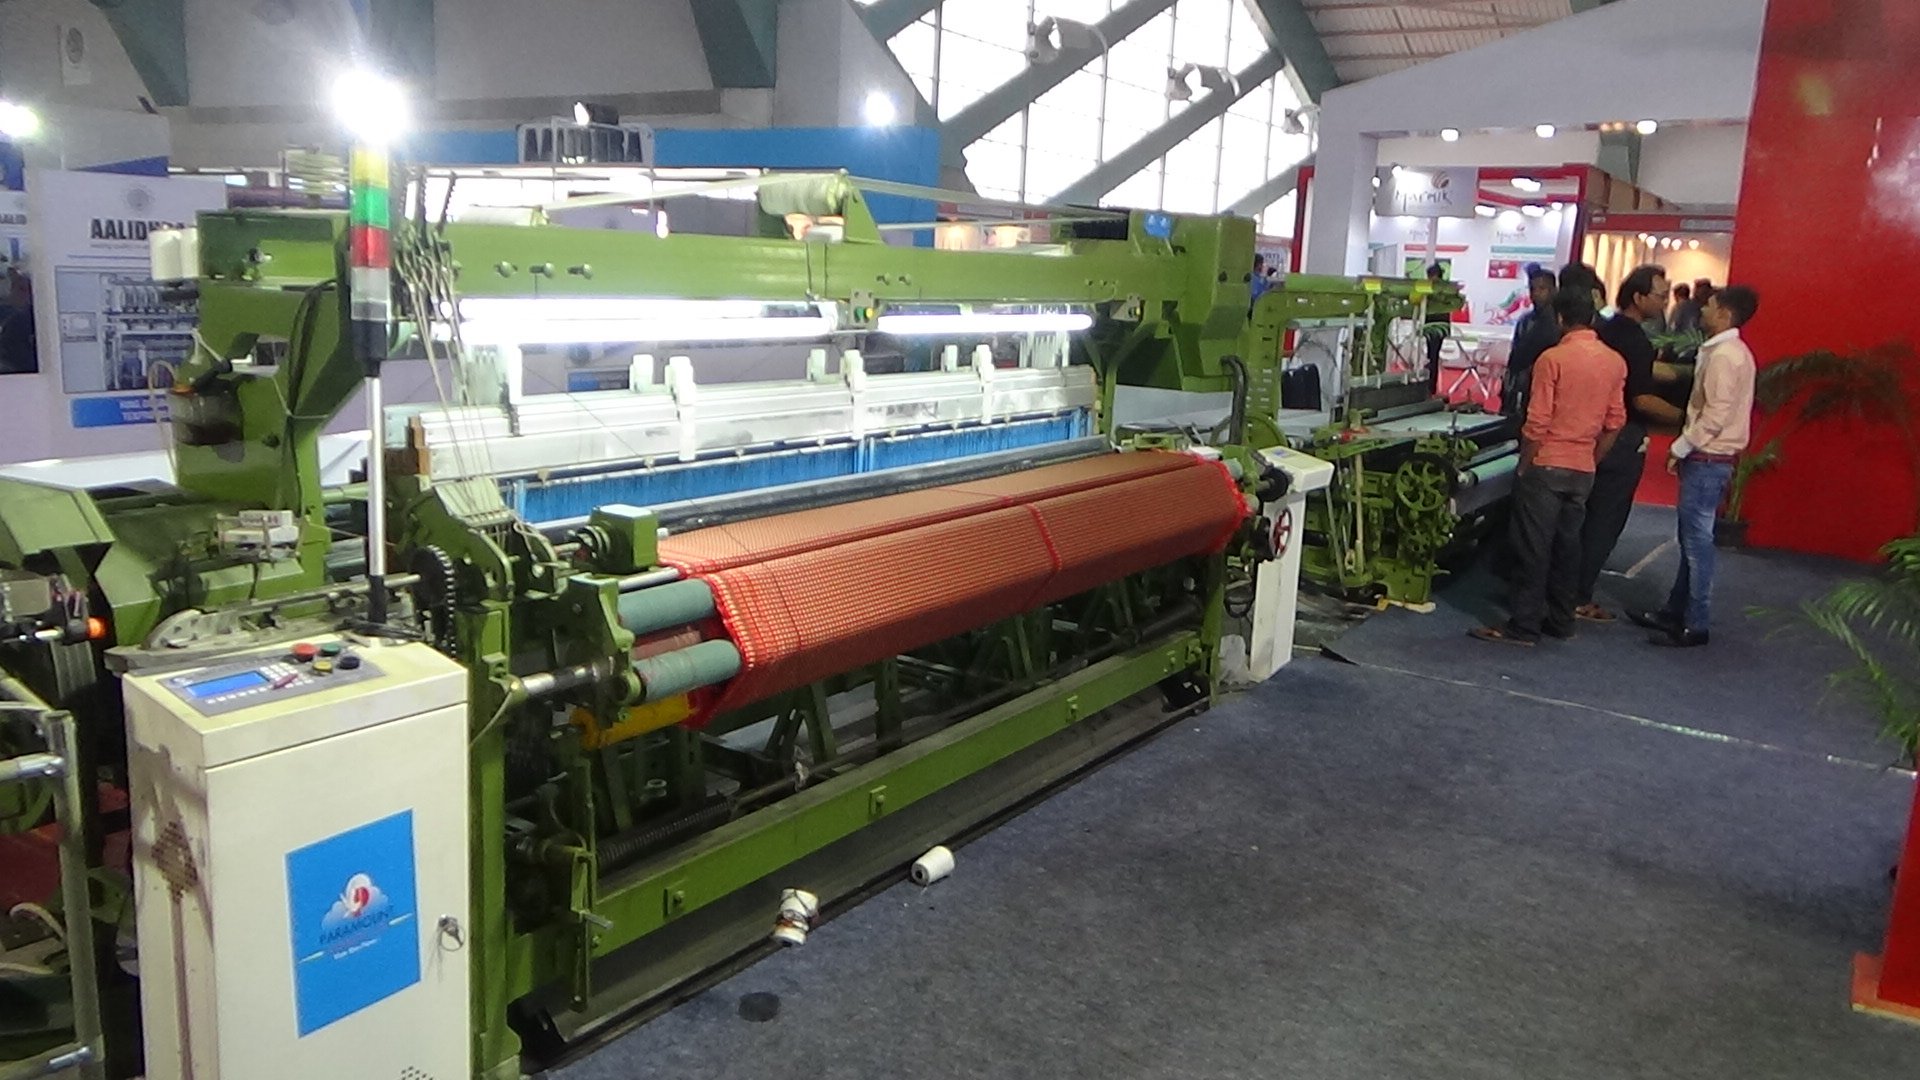 5 ways to choose Best Rapier Loom Machine Manufacturer in Surat for Fabric  Production? - paramount